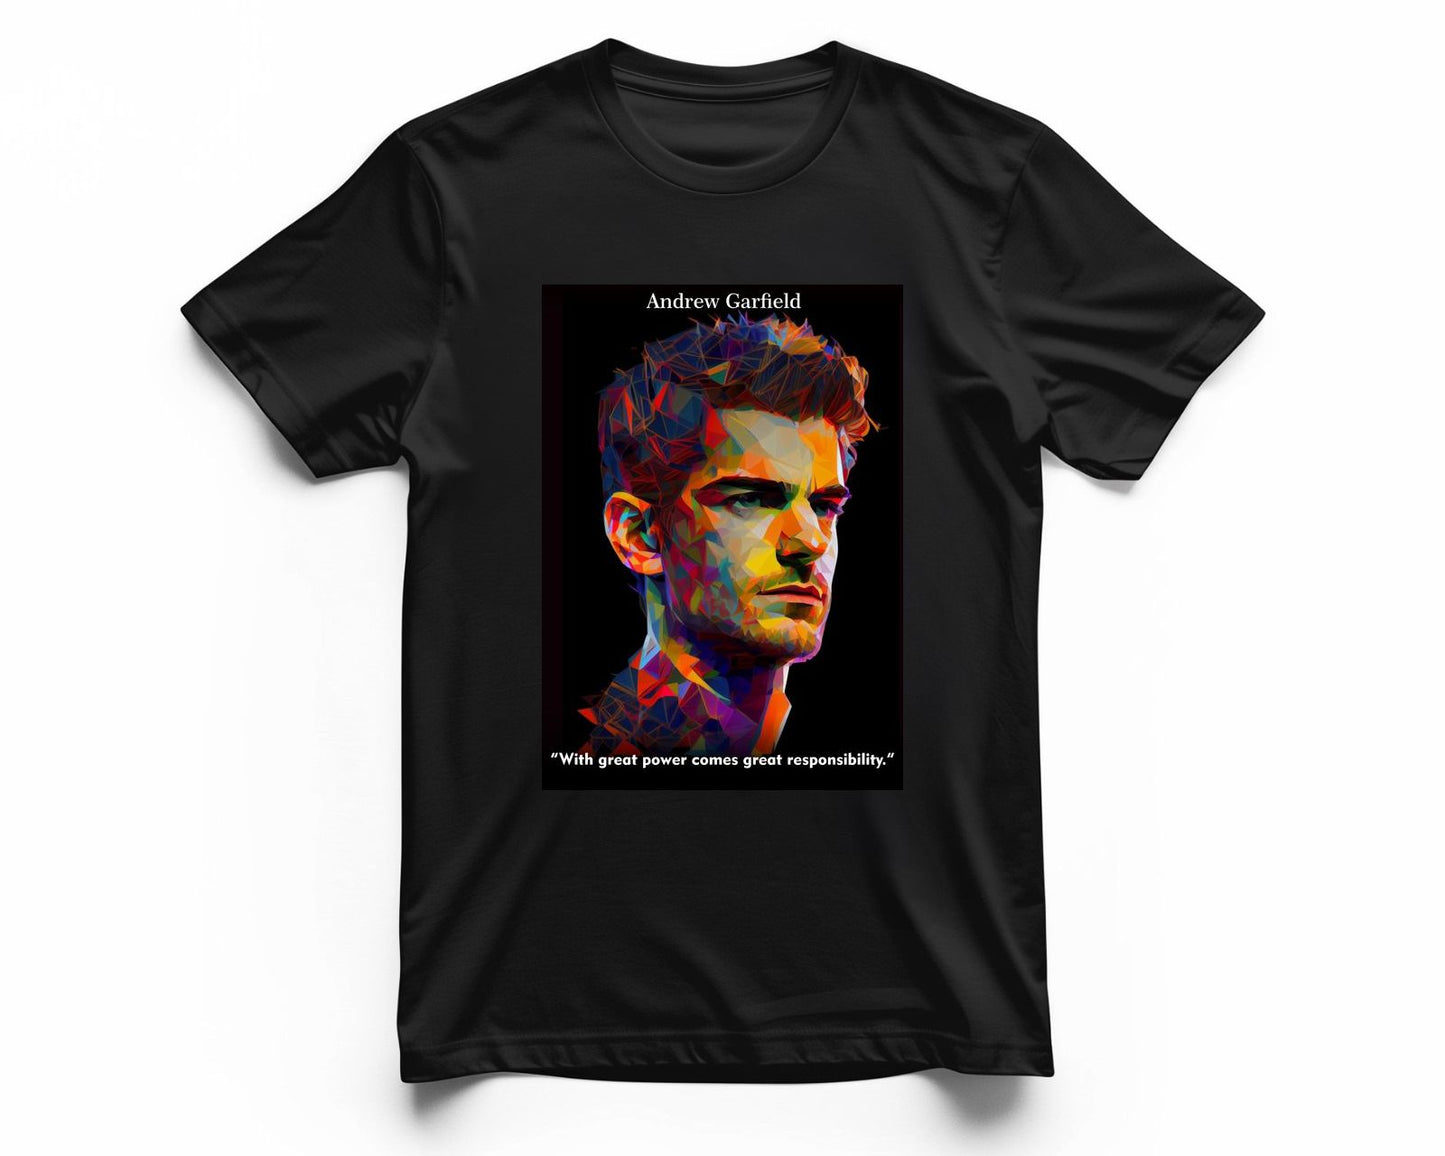 Andrew Garfield Low Poly - @WpapArtist